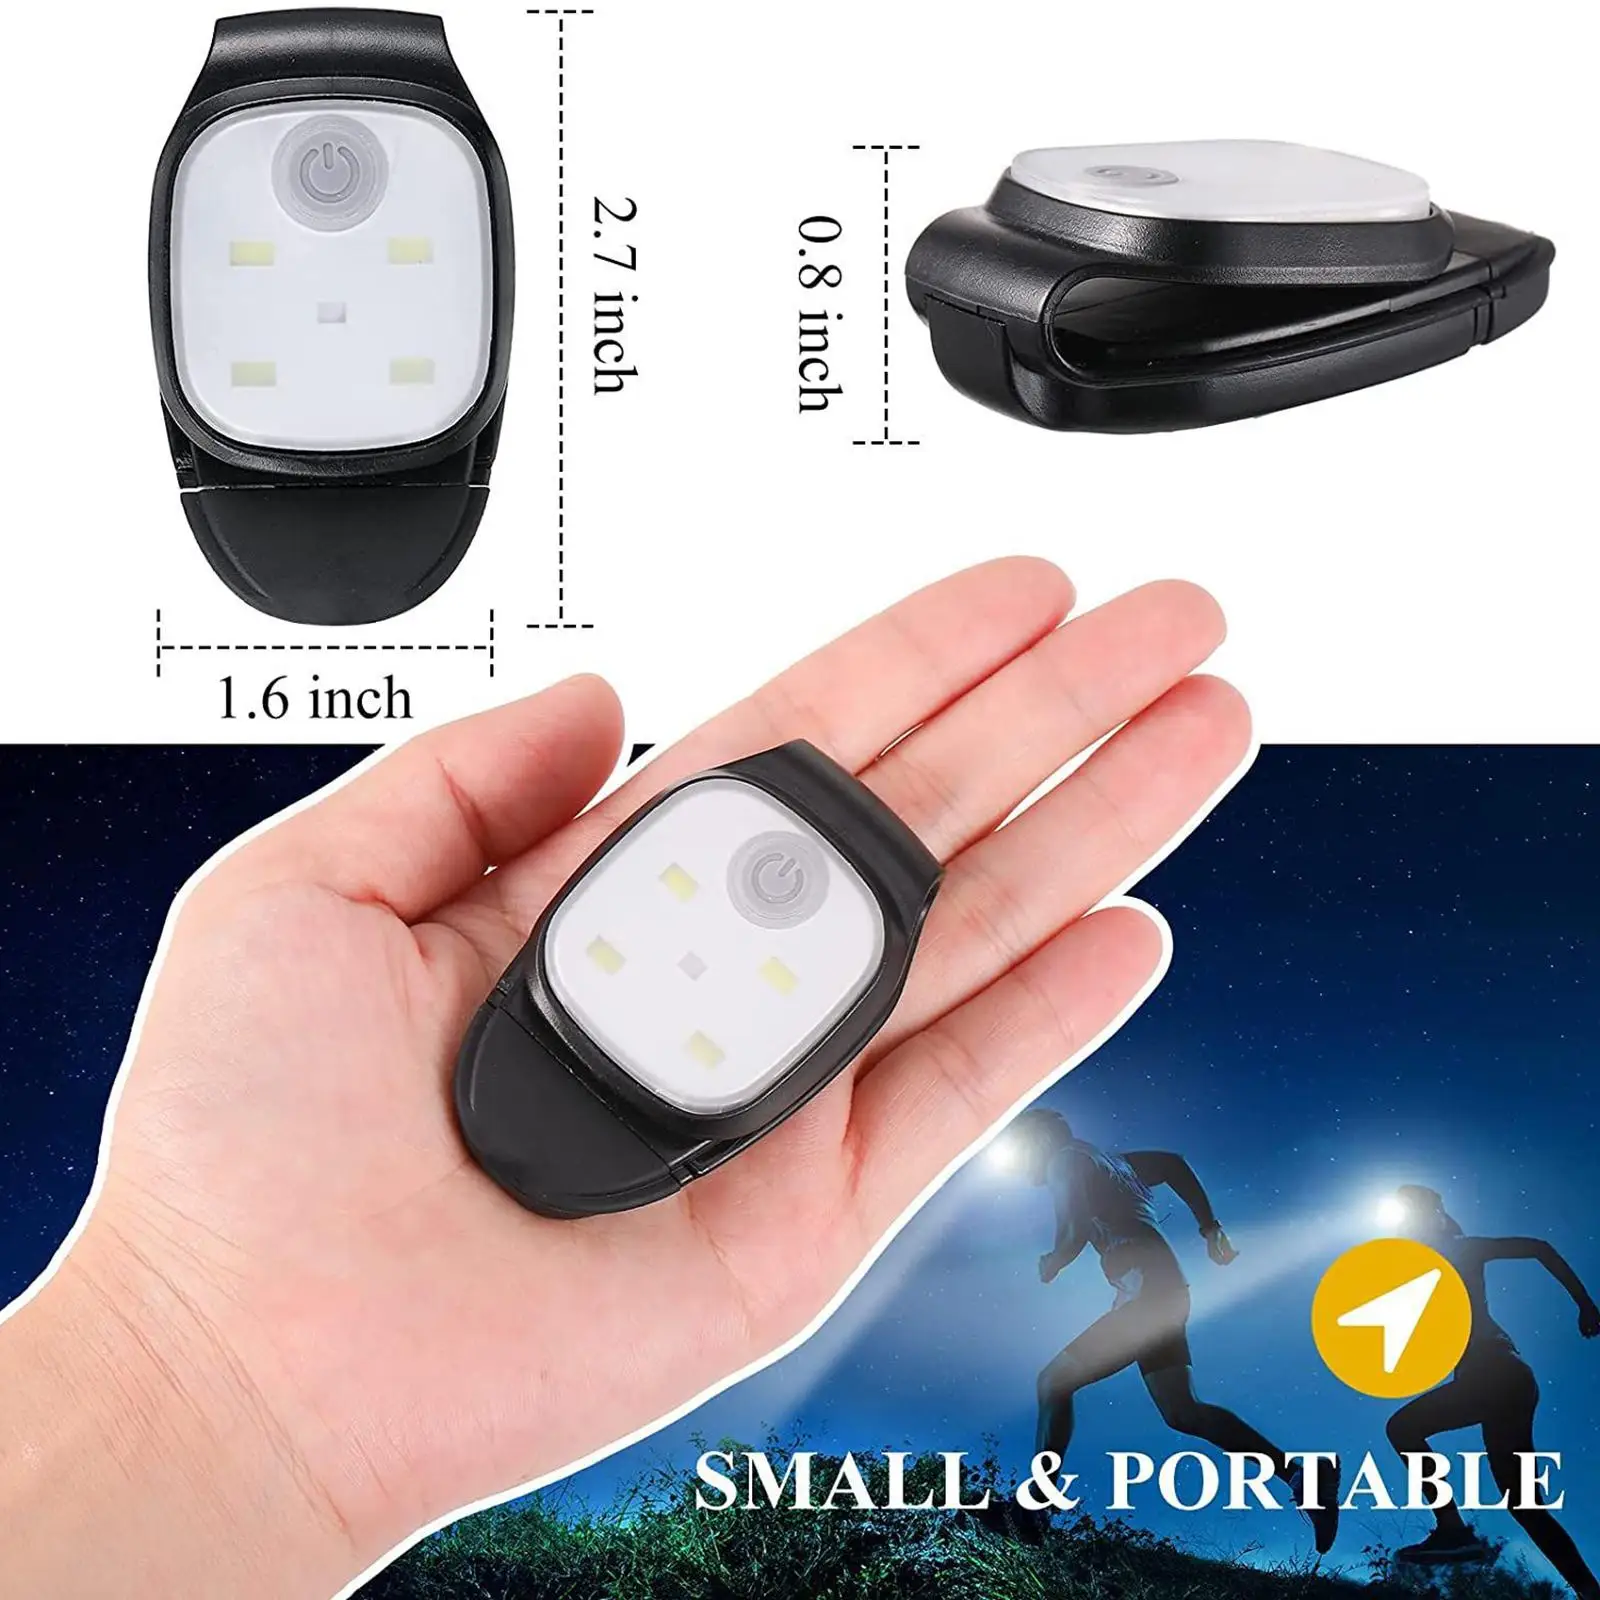 2Pcs LED Flashing Light Reflective Light Accessories Signal Lights Clip Safety Light for Walking Runners Walkers Cycling Child